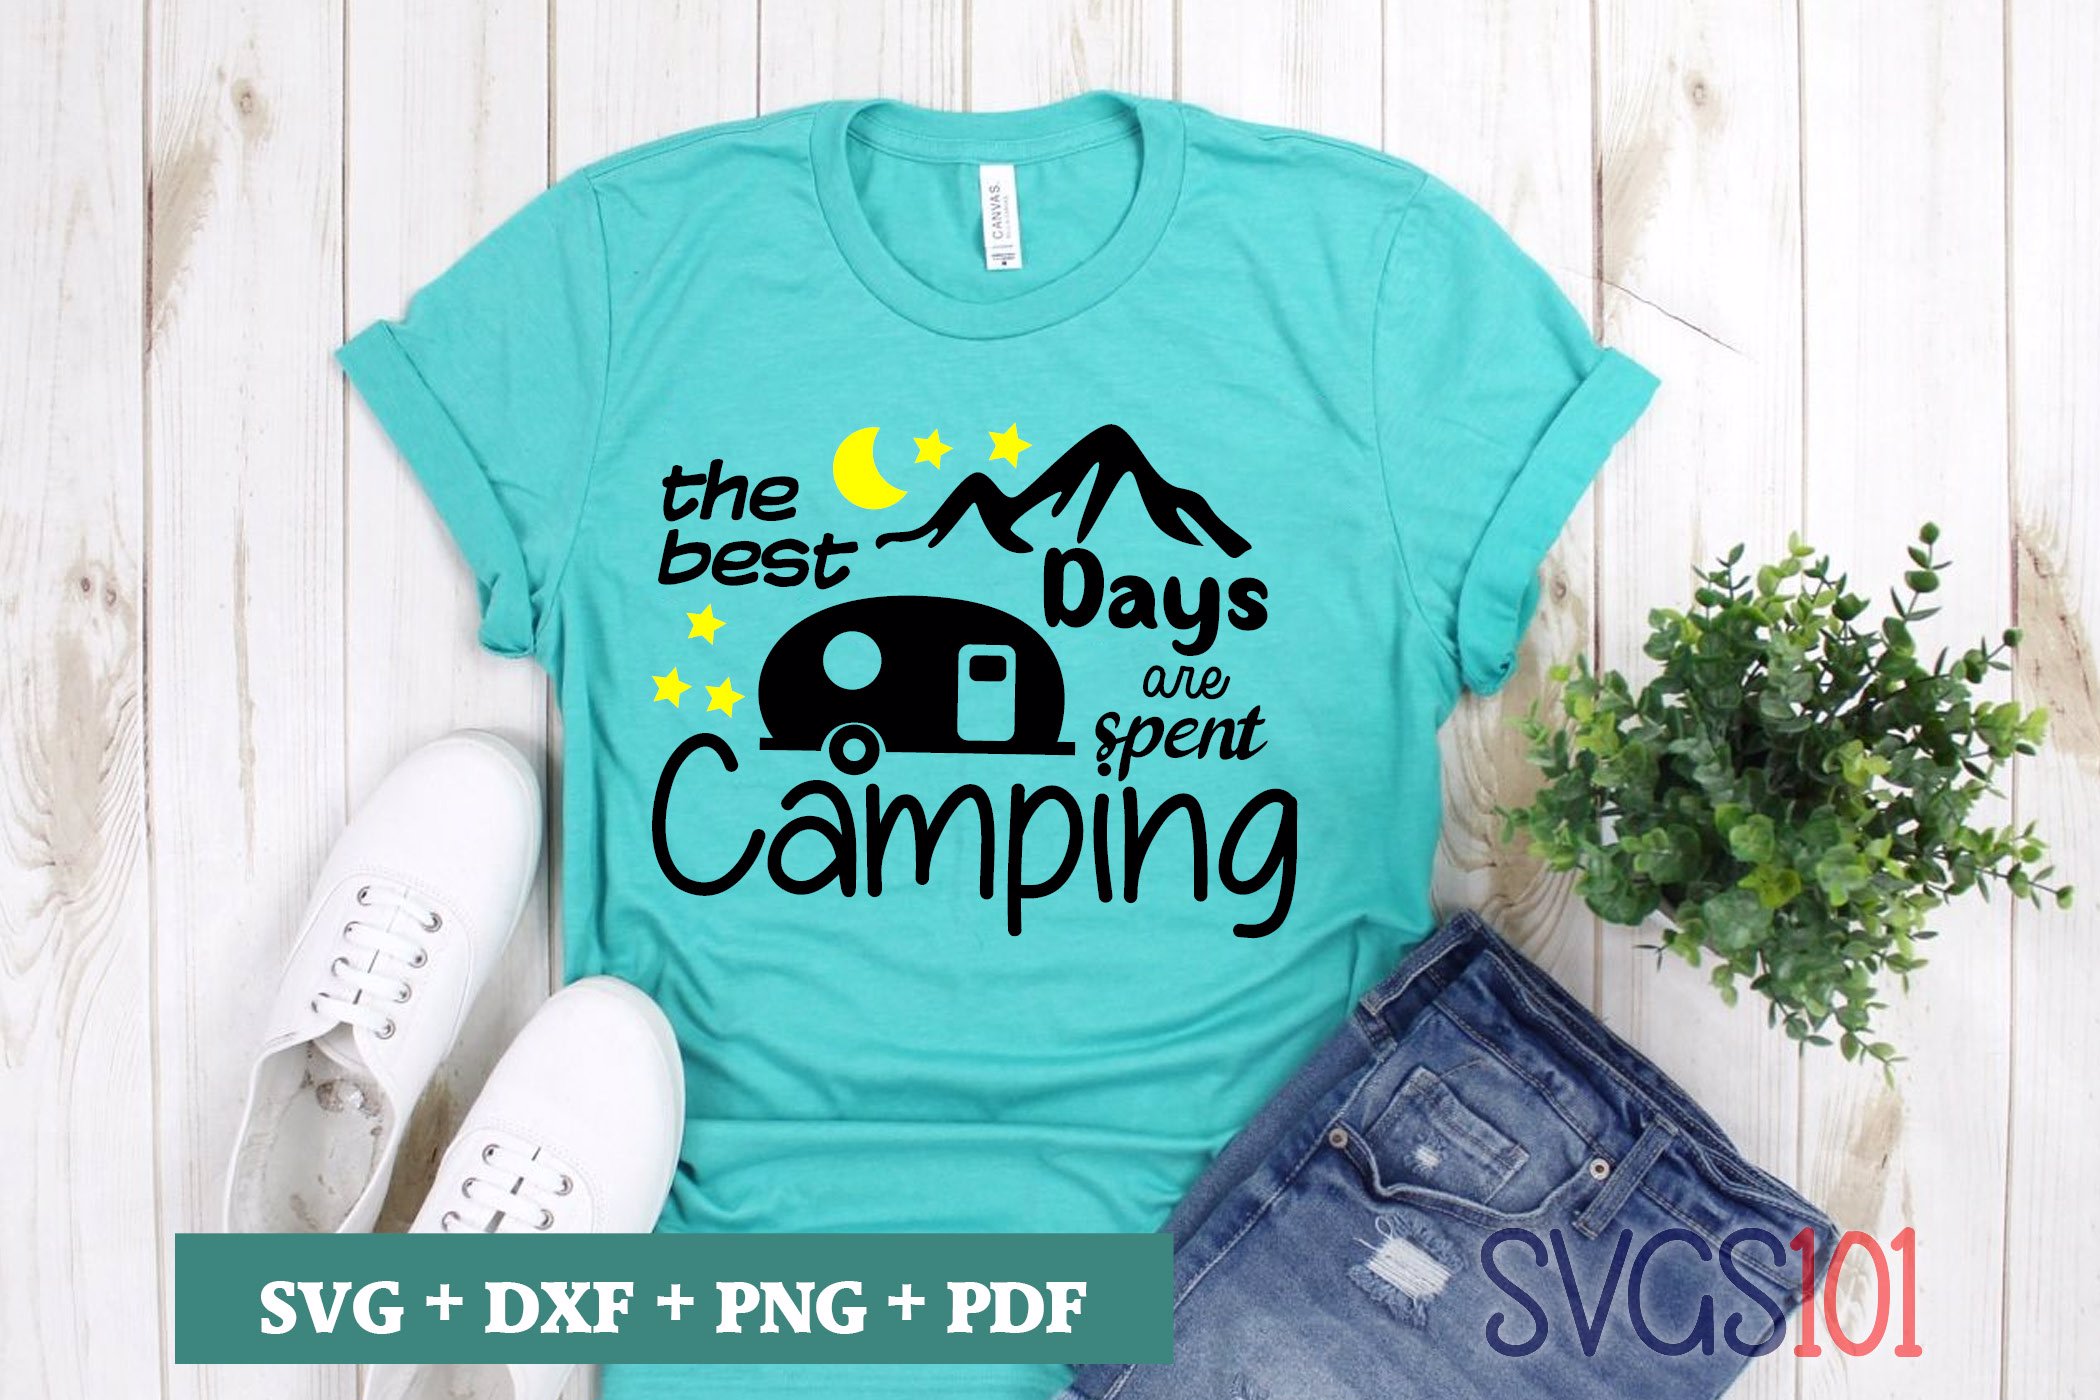 Download The Best Days Are Spent Camping SVG Cuttable file - DXF ...